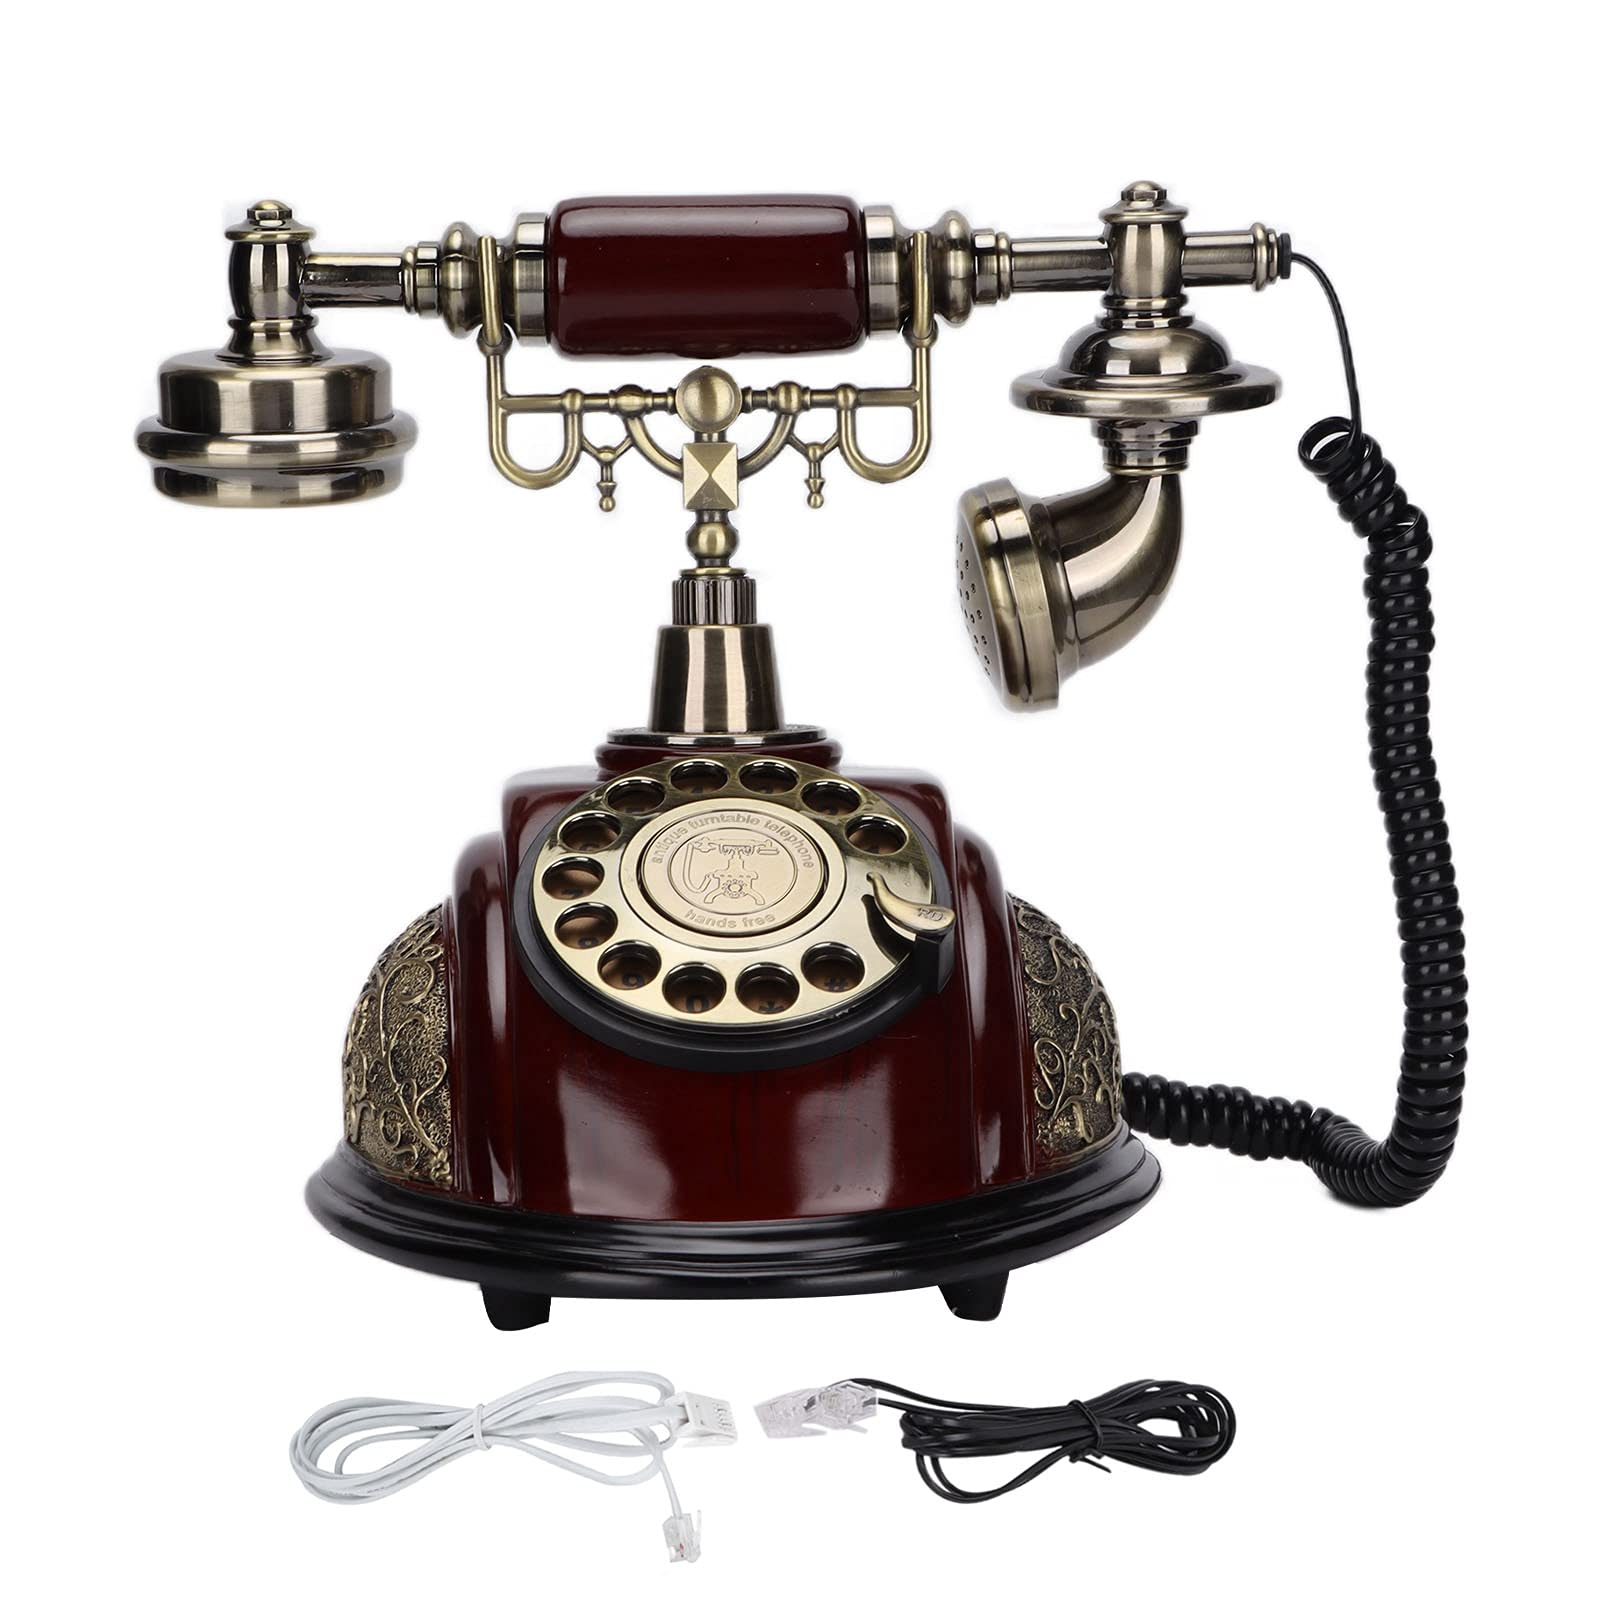 Dial Retro Old Fashioned Landline Telephone for Home Office Cafe Bar Decor,Retro Antique Phone,European Style Landline Telephone Decor Collectors Gift